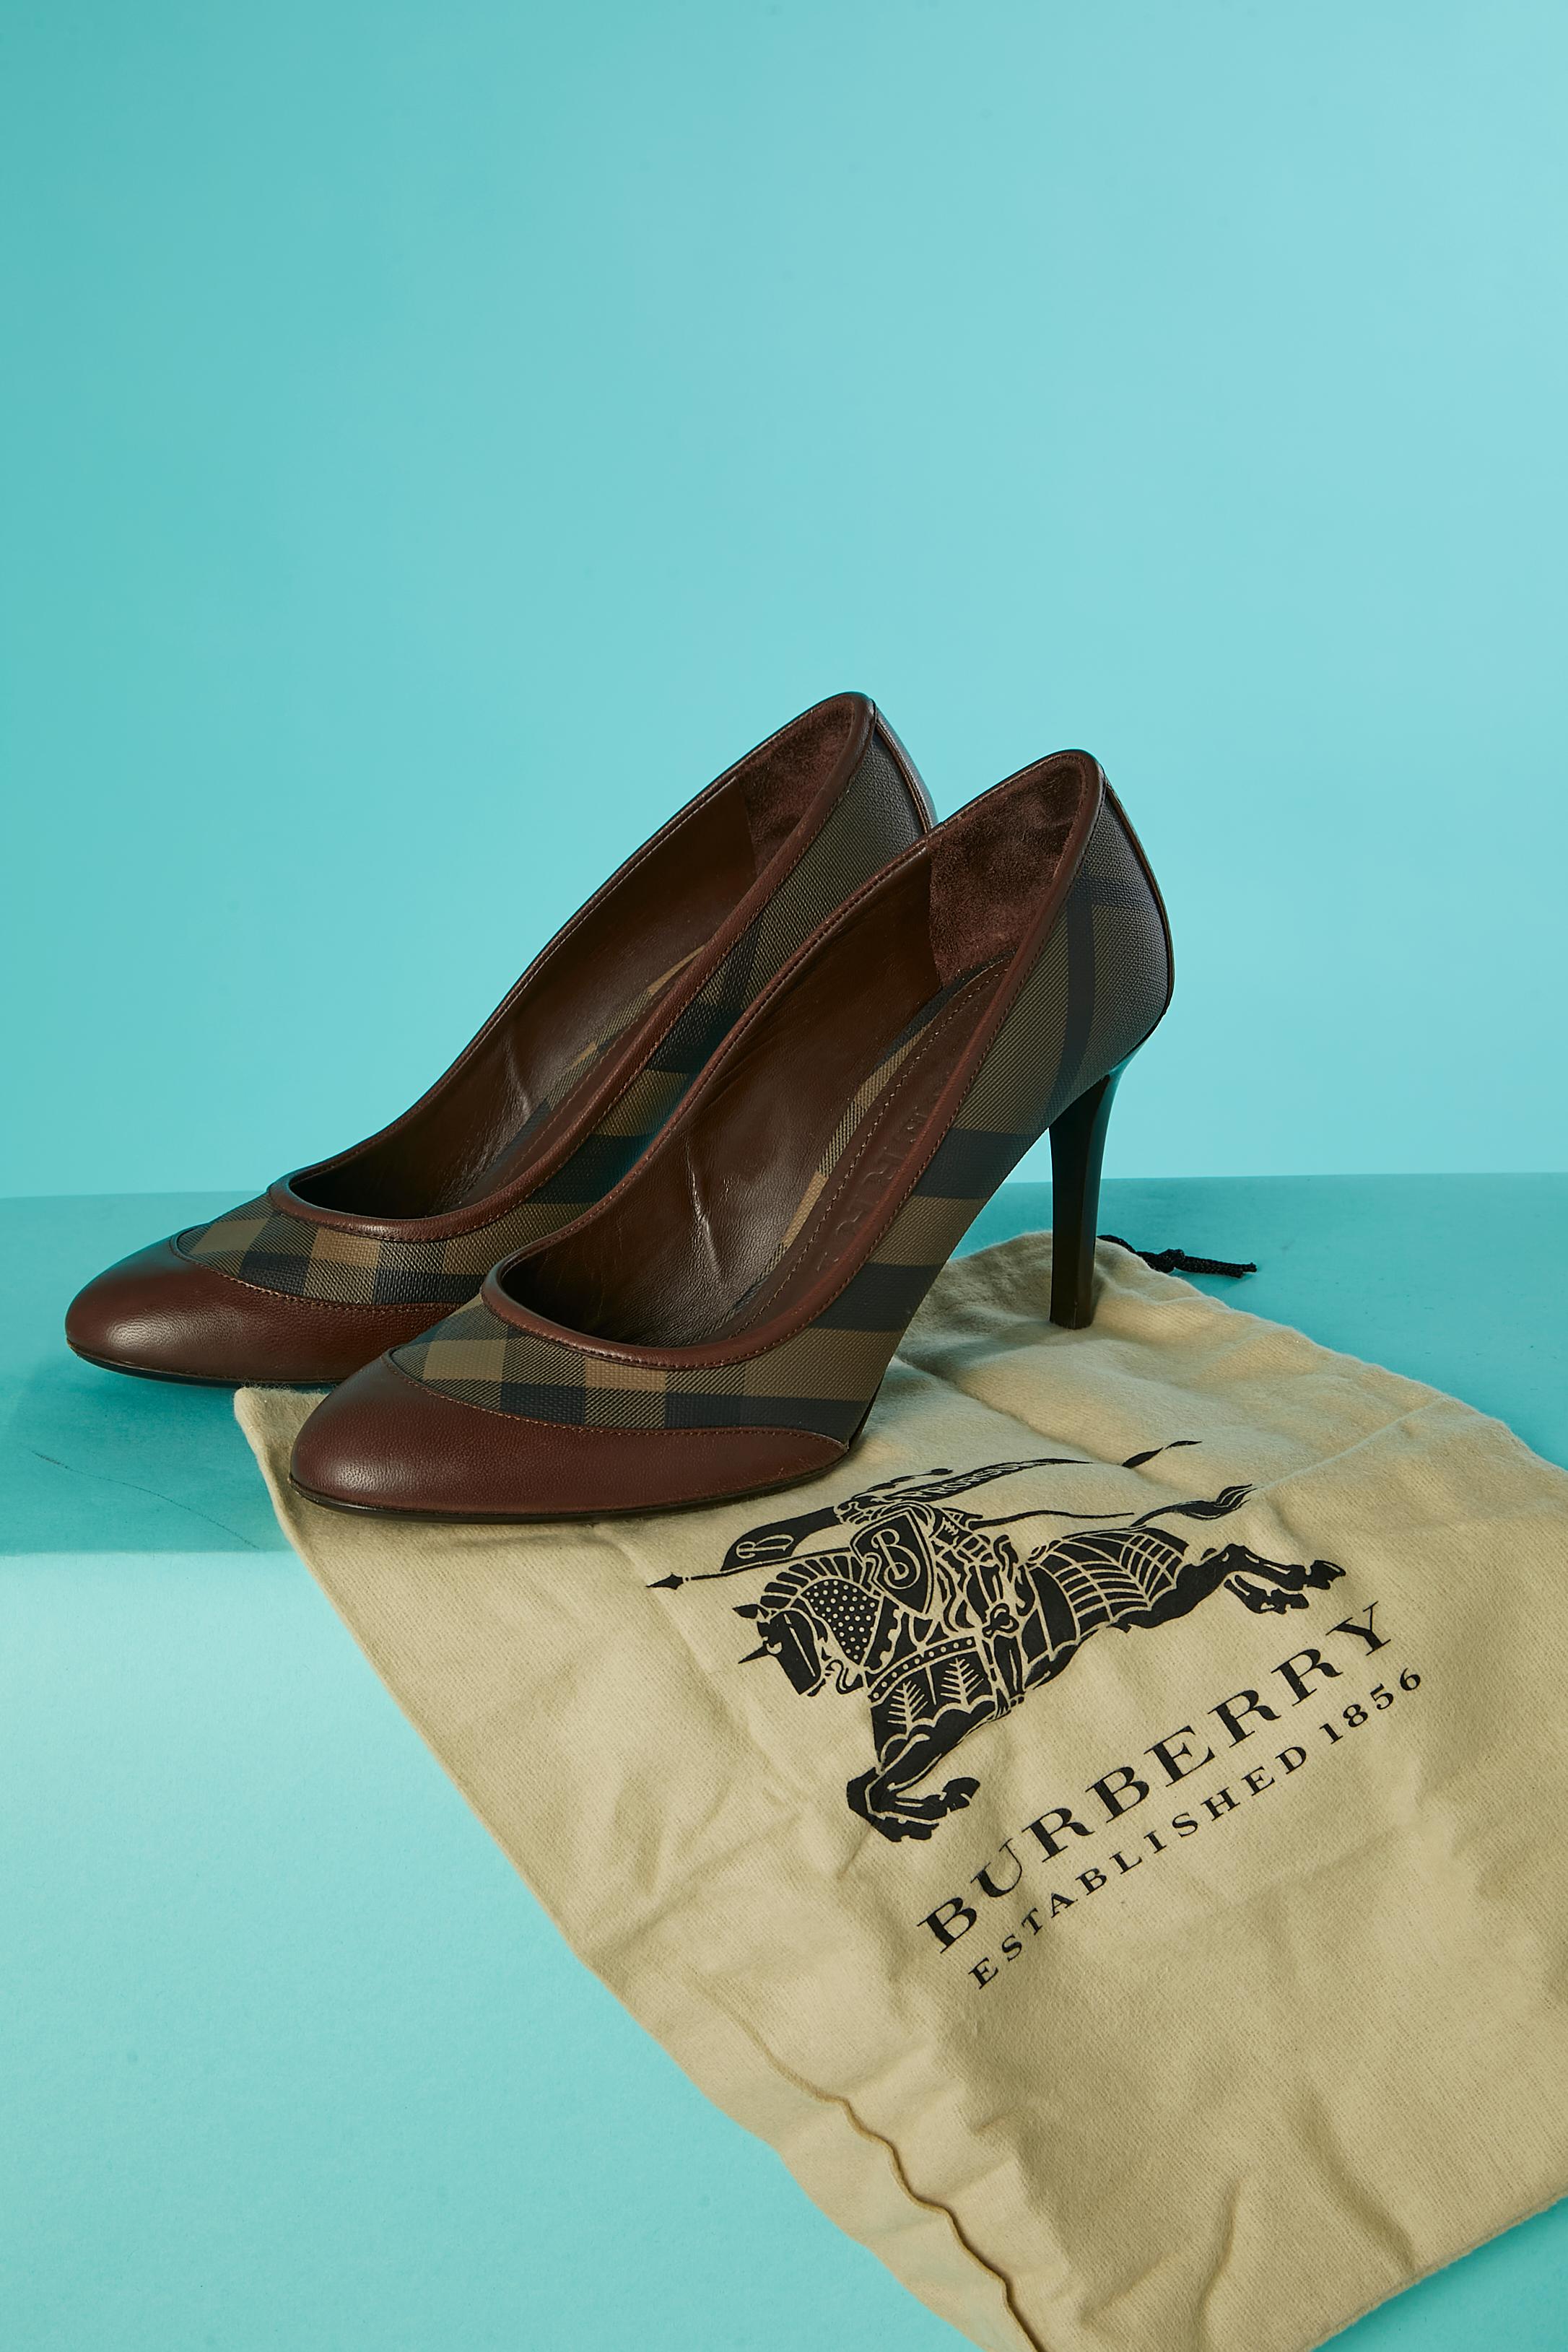 Half-check coated canevas and brown leather pump. 
Heel height : 8,5 cm 
Inside plateform 0,5 cm 
SHOES SIZE 39 1/2 ( 7,5/ 8 US) 